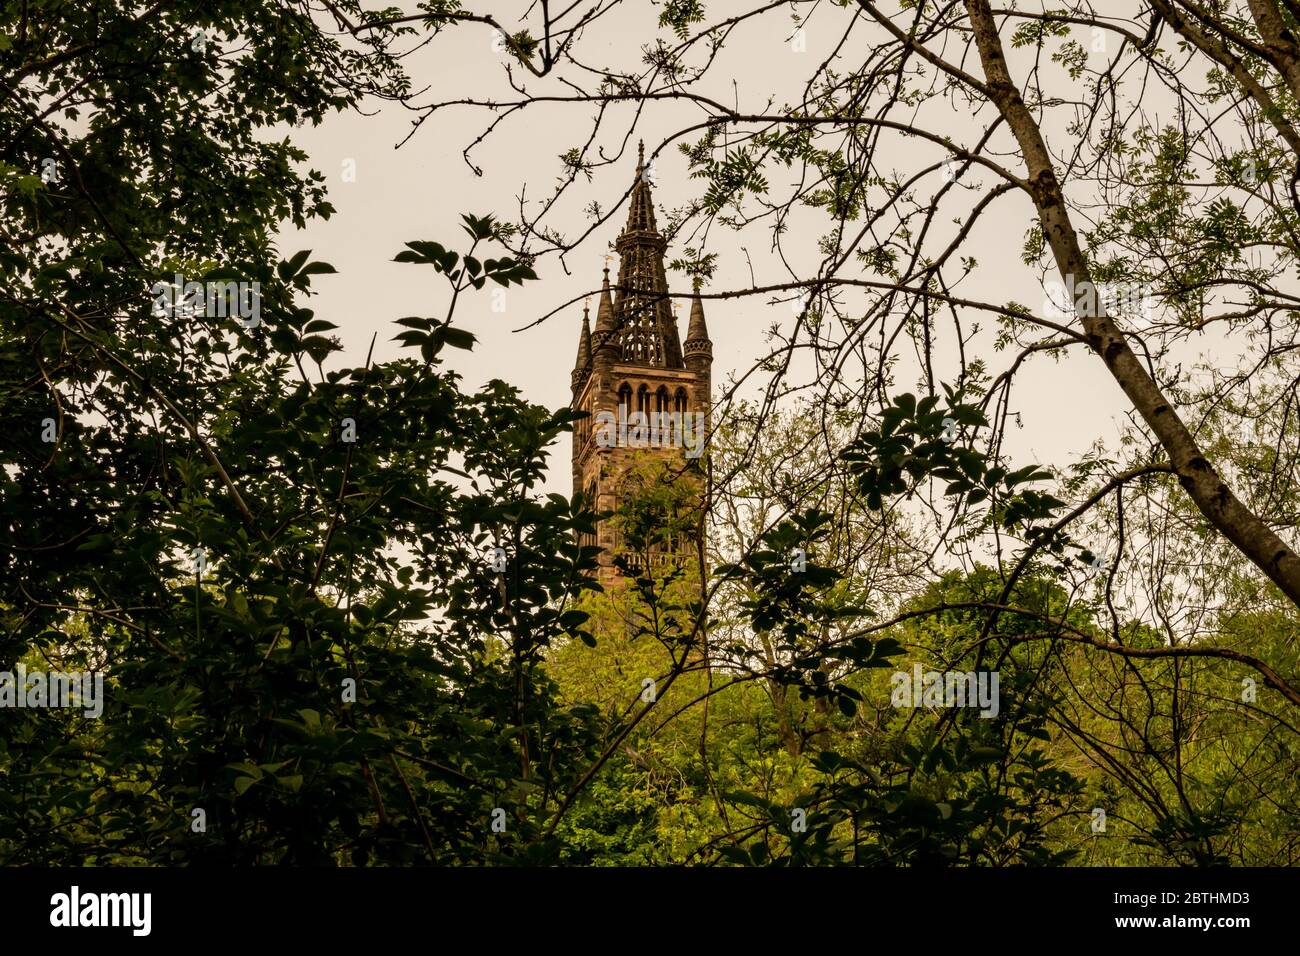 Looking through the trees of Kelvingrove Park up at the tower of Glasgow University's main building, The Gilbert Scott Building in the West End. Stock Photo